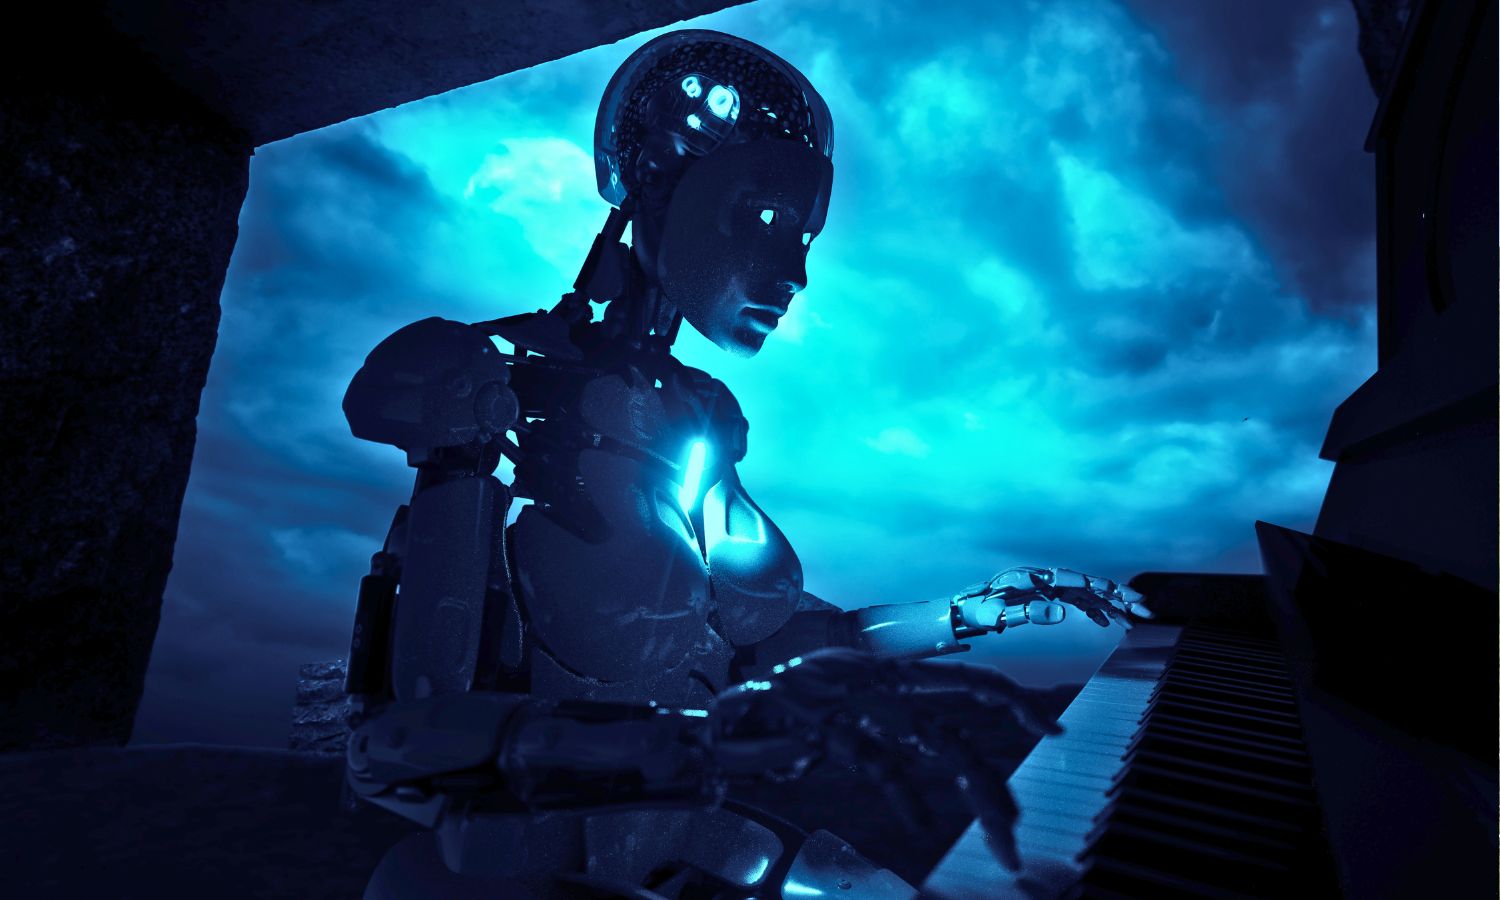 An image of an AI robot playing a piano to illustrate Stable Audio